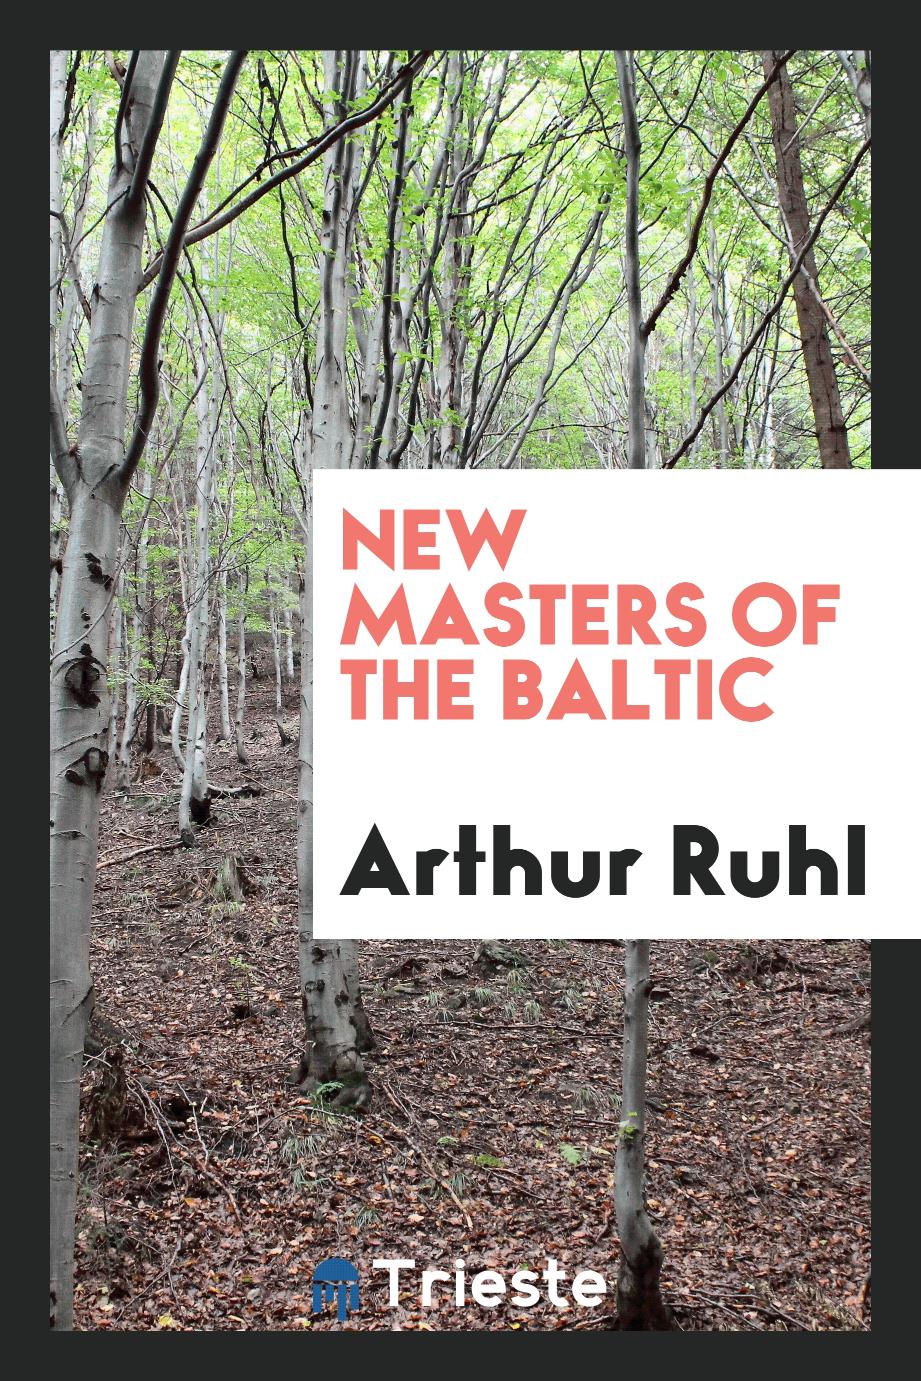 New masters of the Baltic